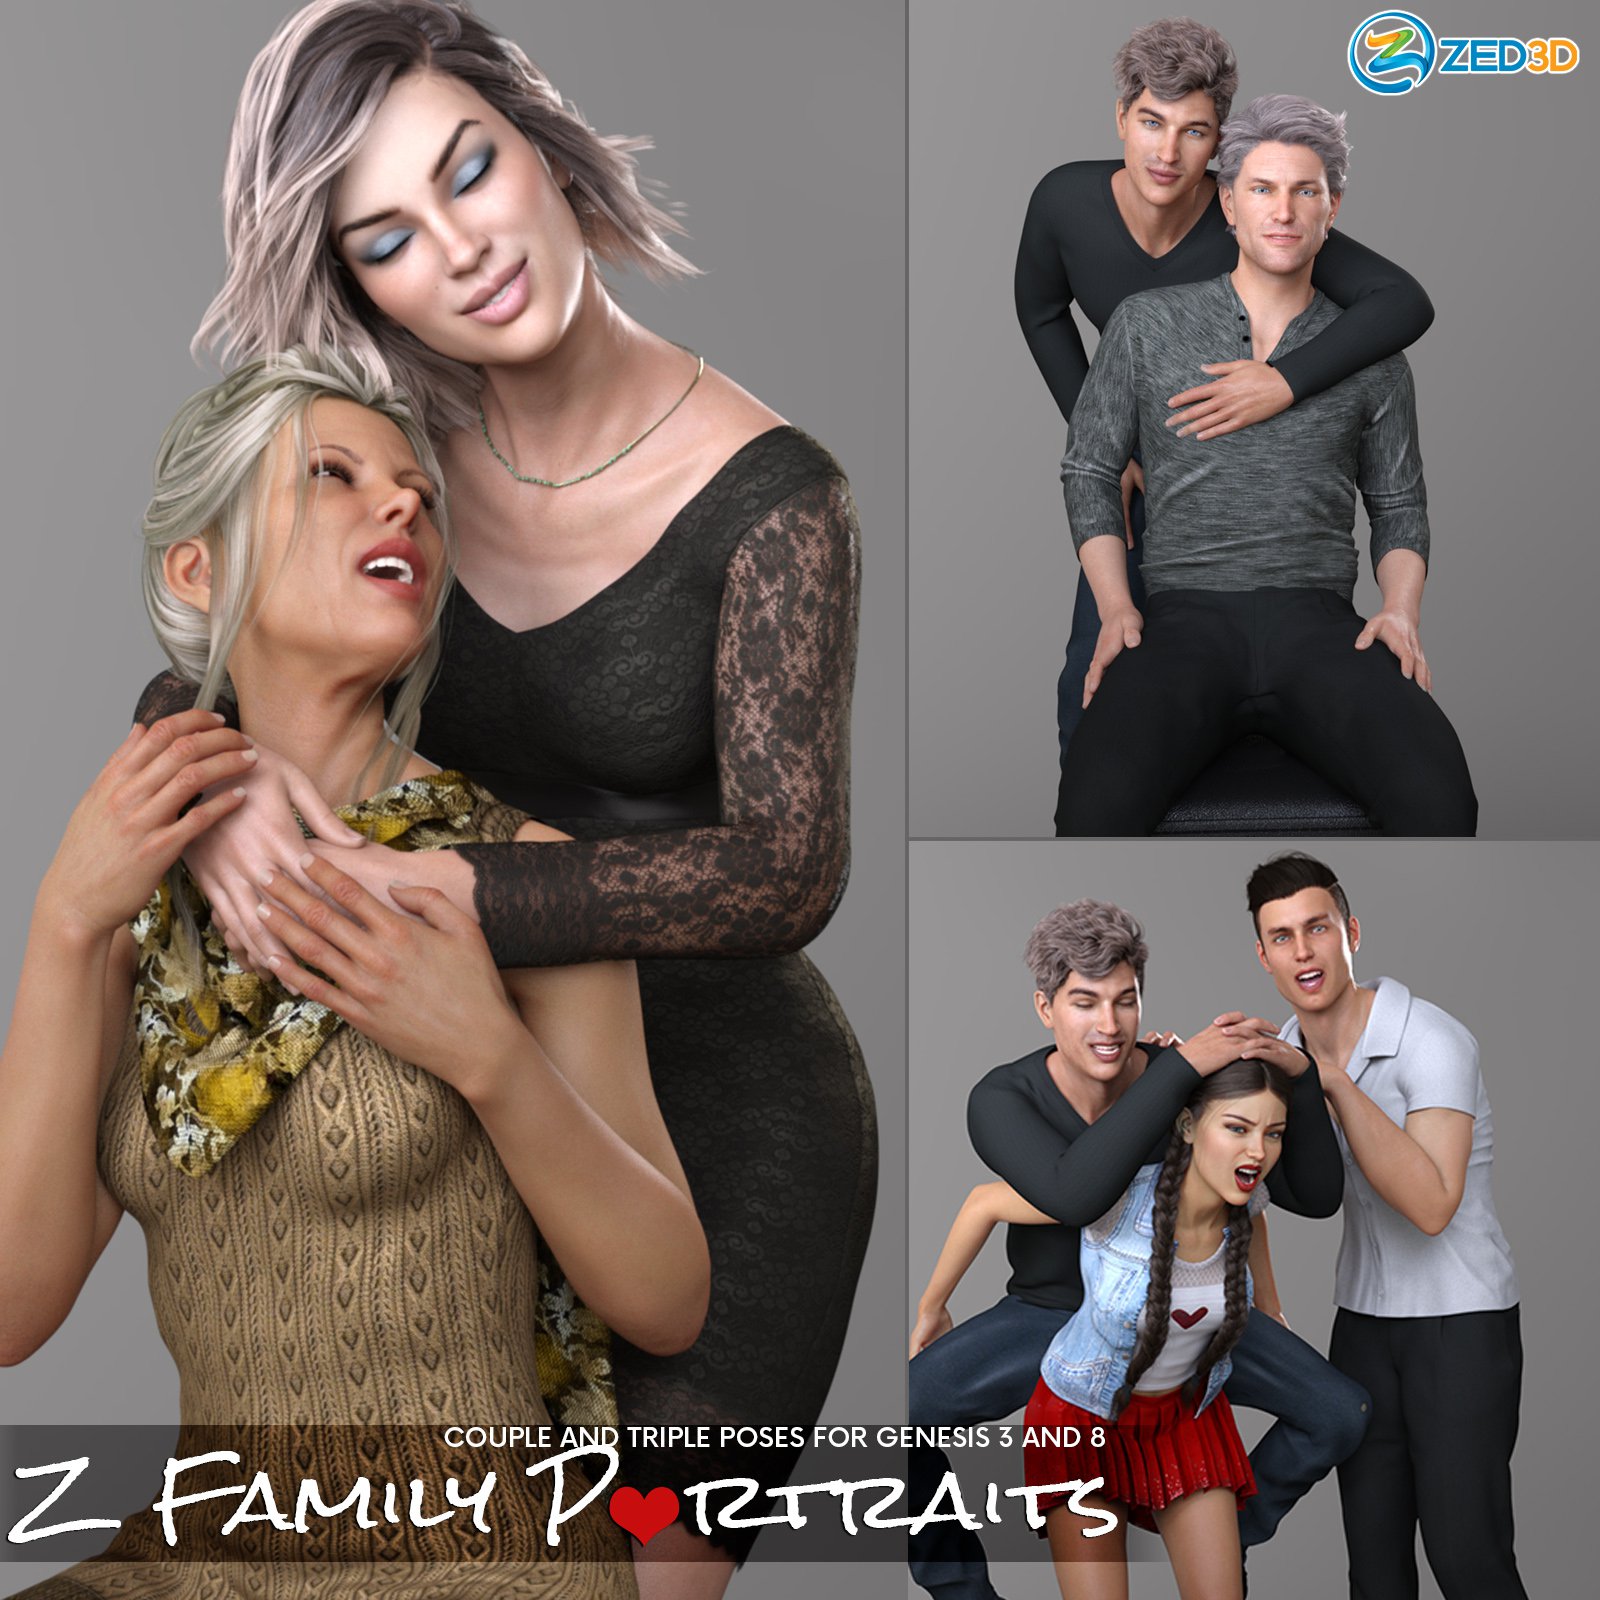 Z Family Portaits – Couple and Triple Poses for Genesis 3 and 8 Male and Female_DAZ3D下载站